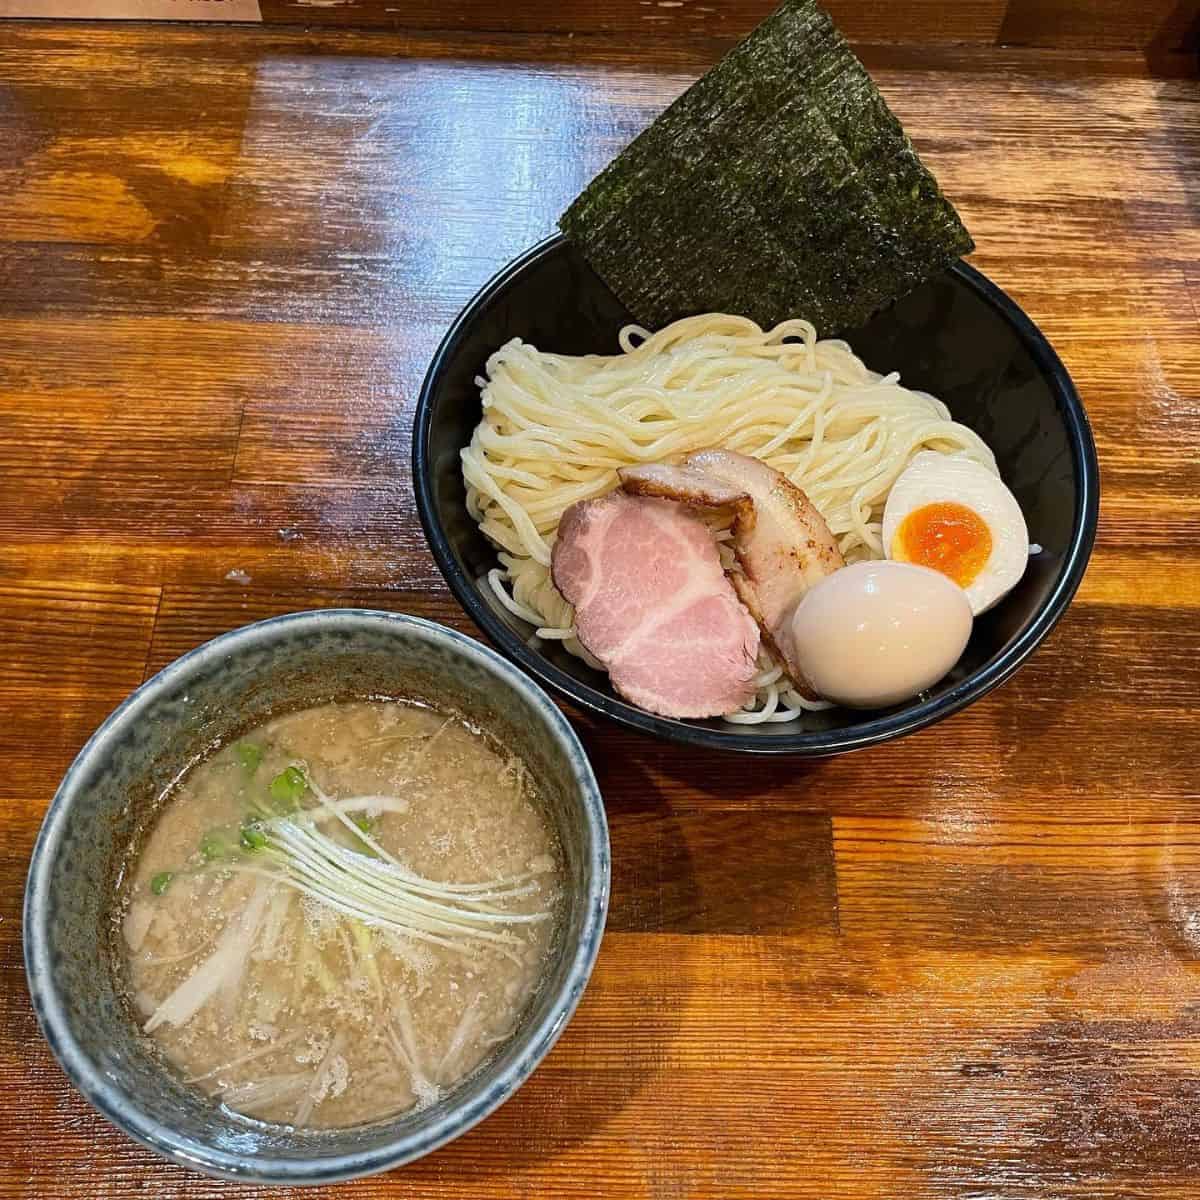 A hot Tsukemen broth and cold noodles with egg and pork